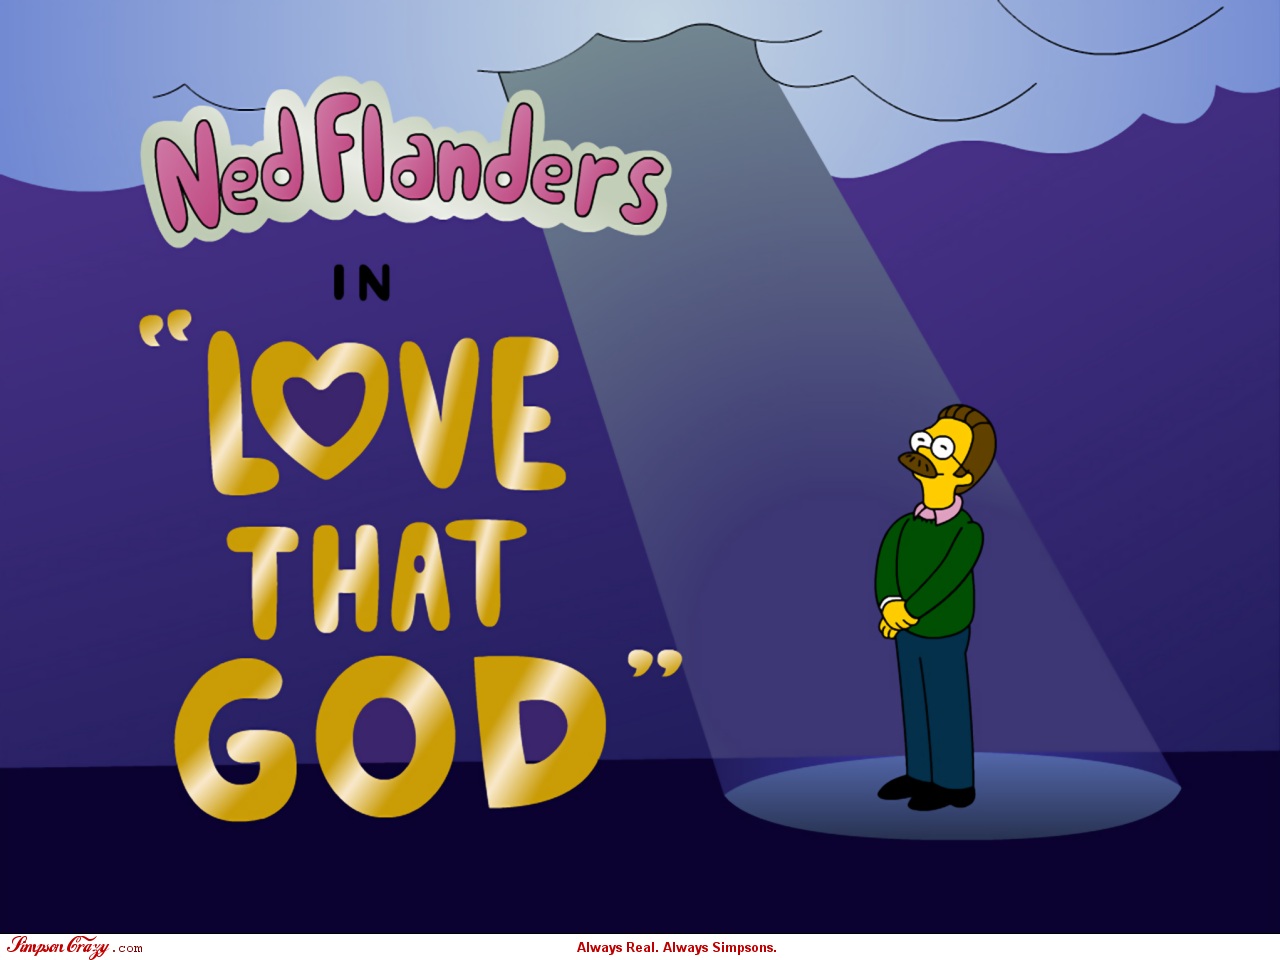 Download wallpaper from tv series The Simpsons with tags: PC, The Simpsons, Ned Flanders